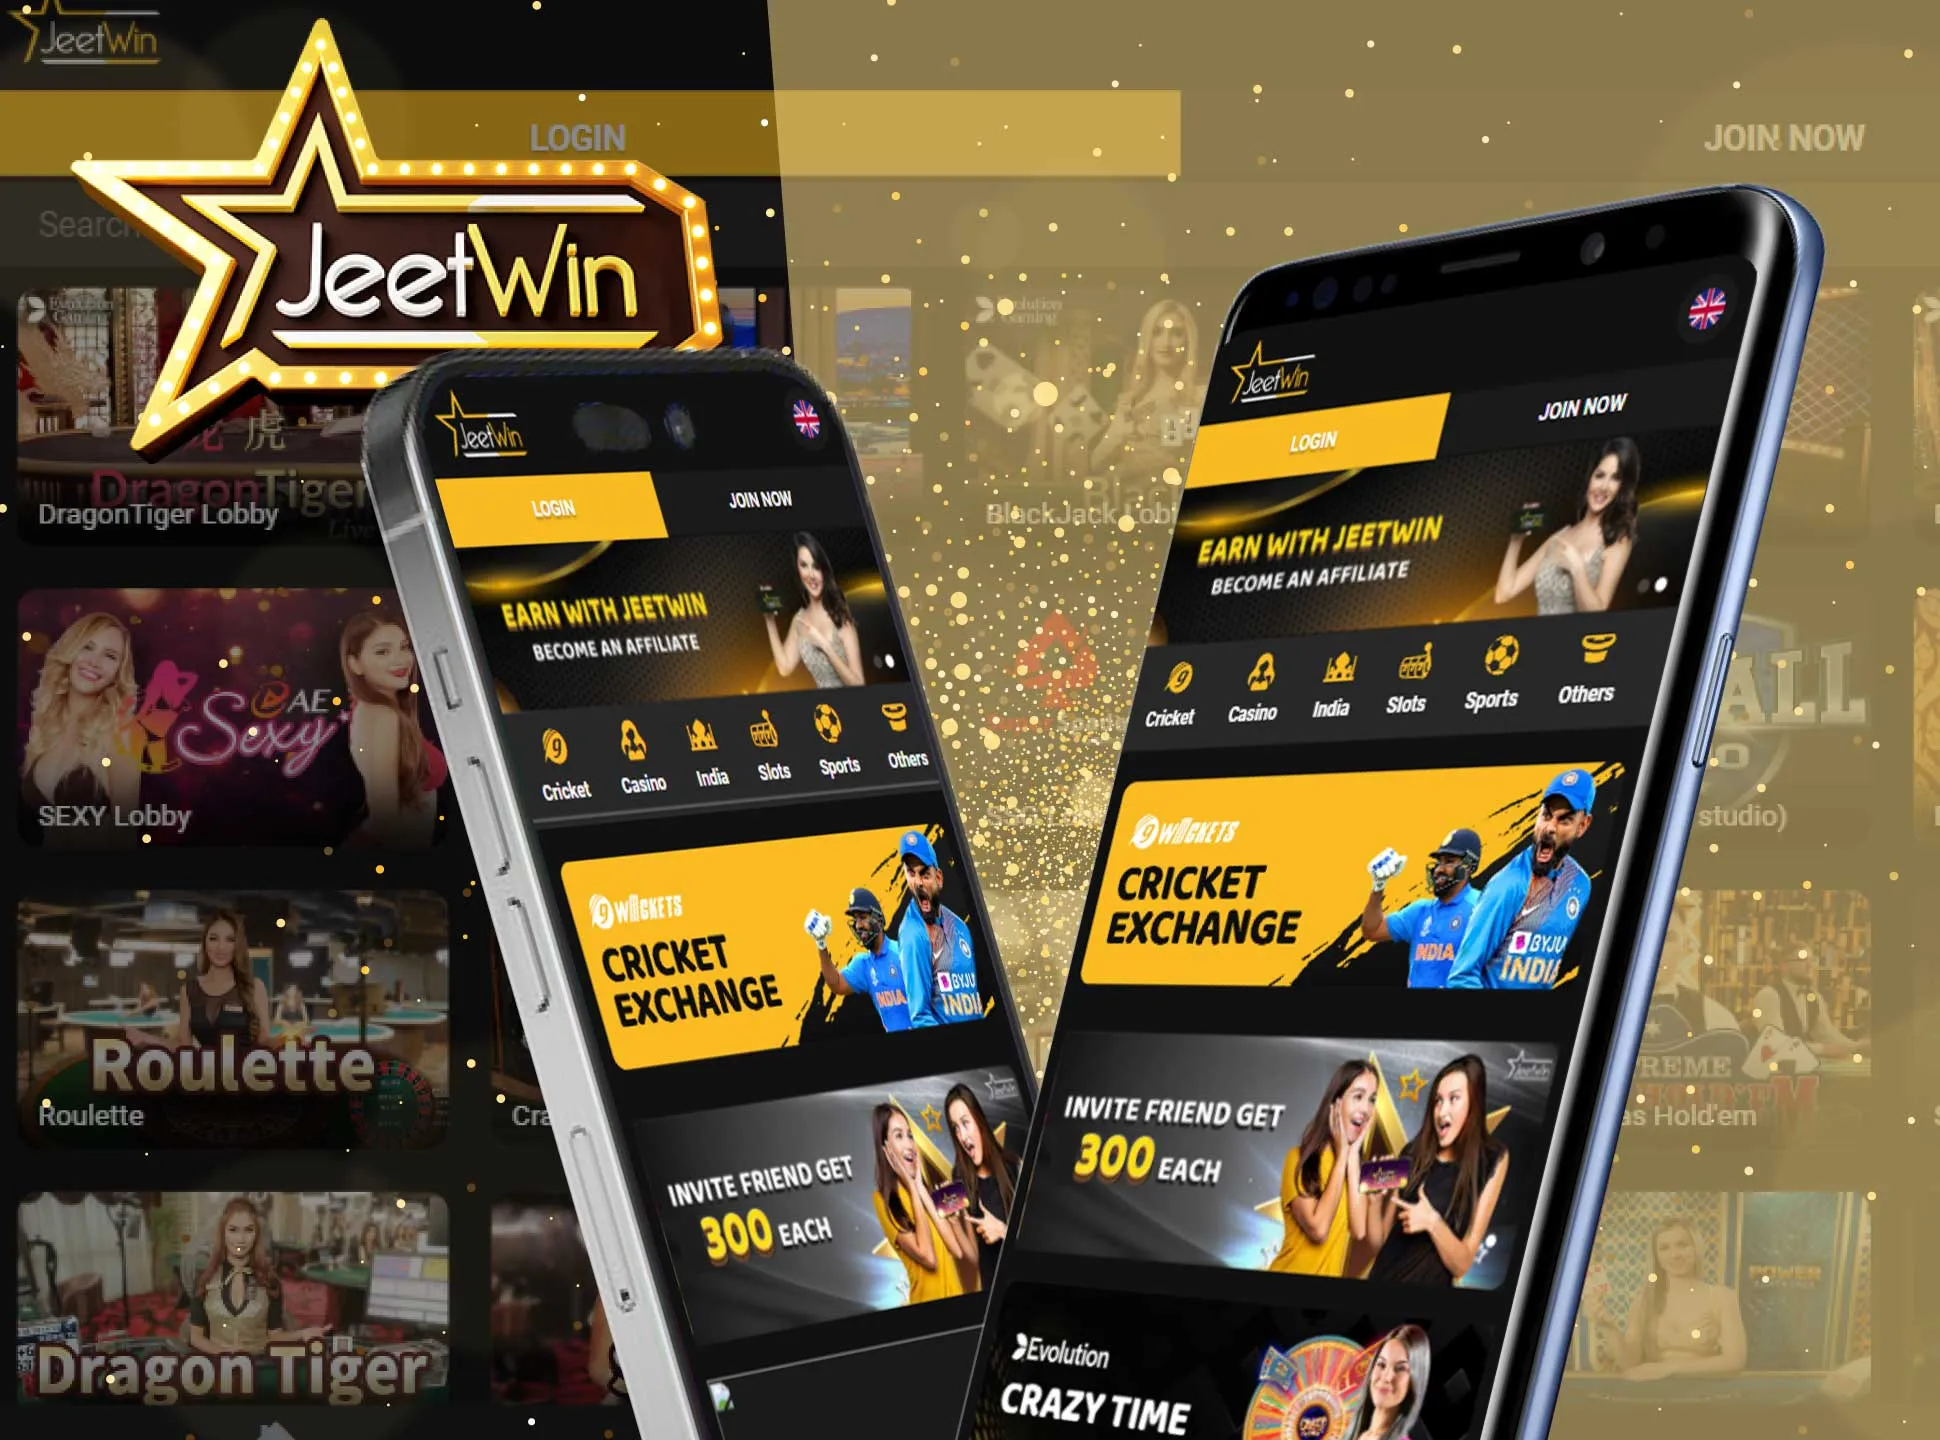 Download the Jeetwin app to place bets and play casino whenever you want.